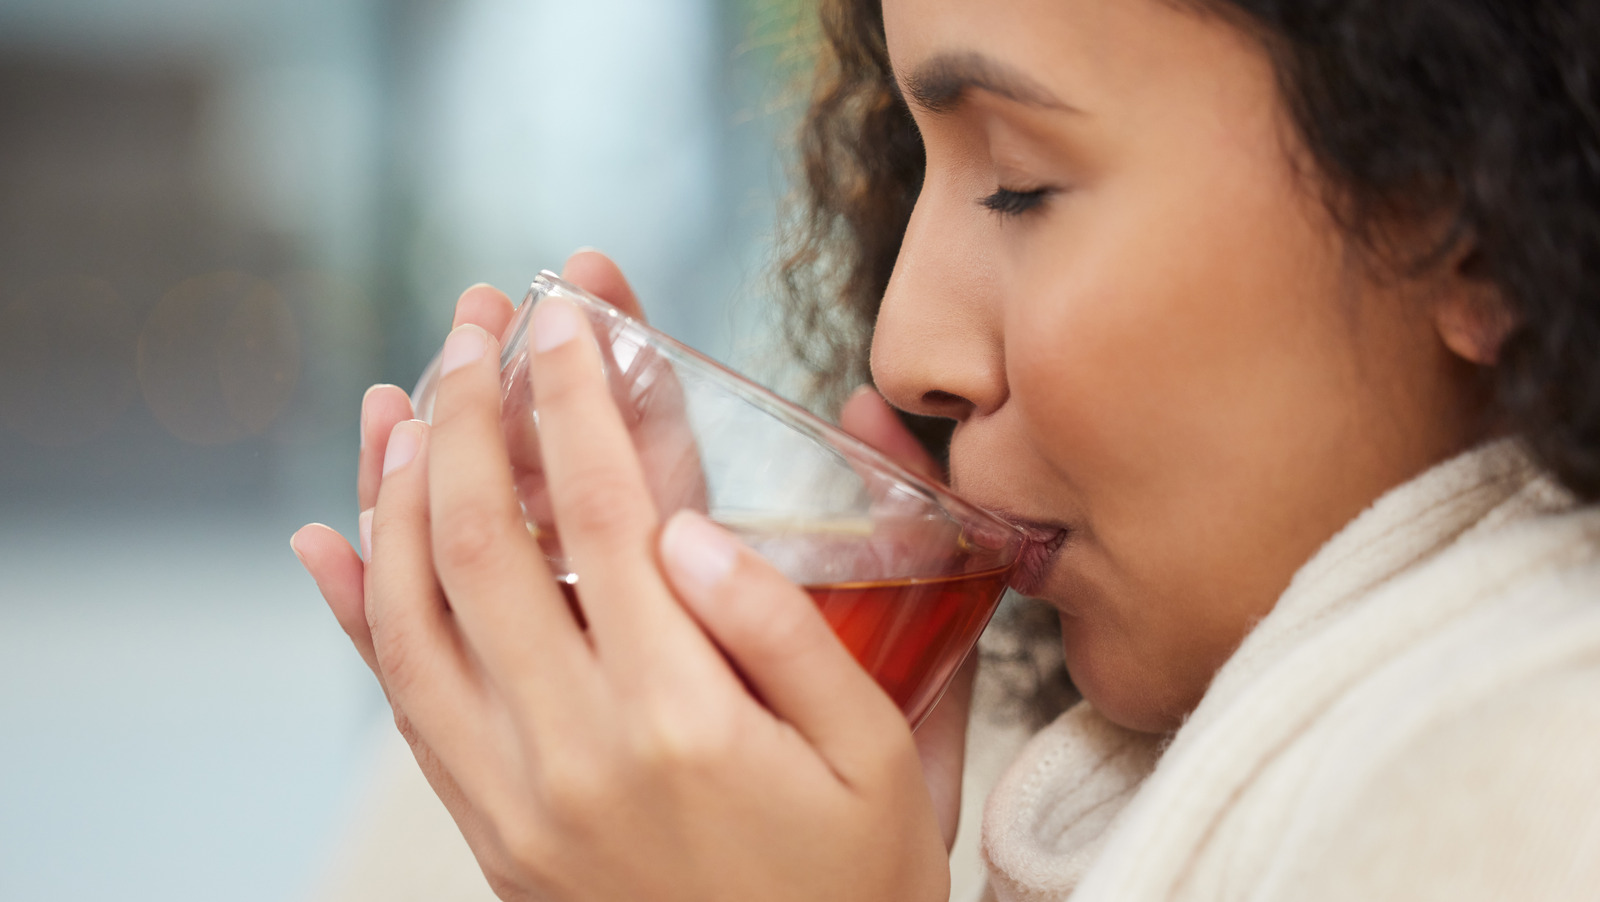 Can This Popular Costco Tea Really Soothe A Sore Throat? Here's What We Know - Health Digest